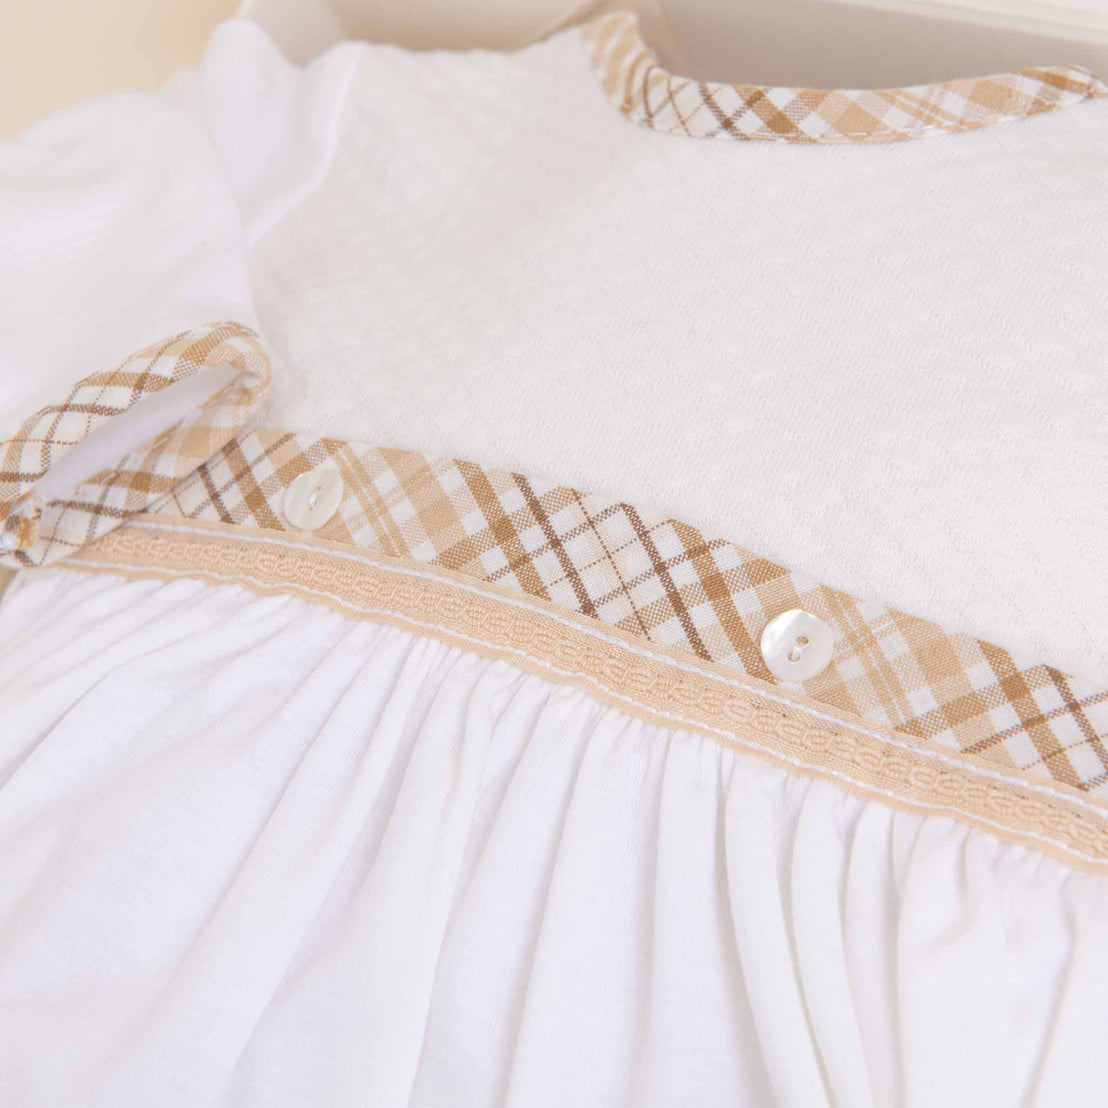 Close-up of a Dylan Layette outfit with delicate lace and a beige checkered fabric detail, featuring small button accents on a soft, textured background.